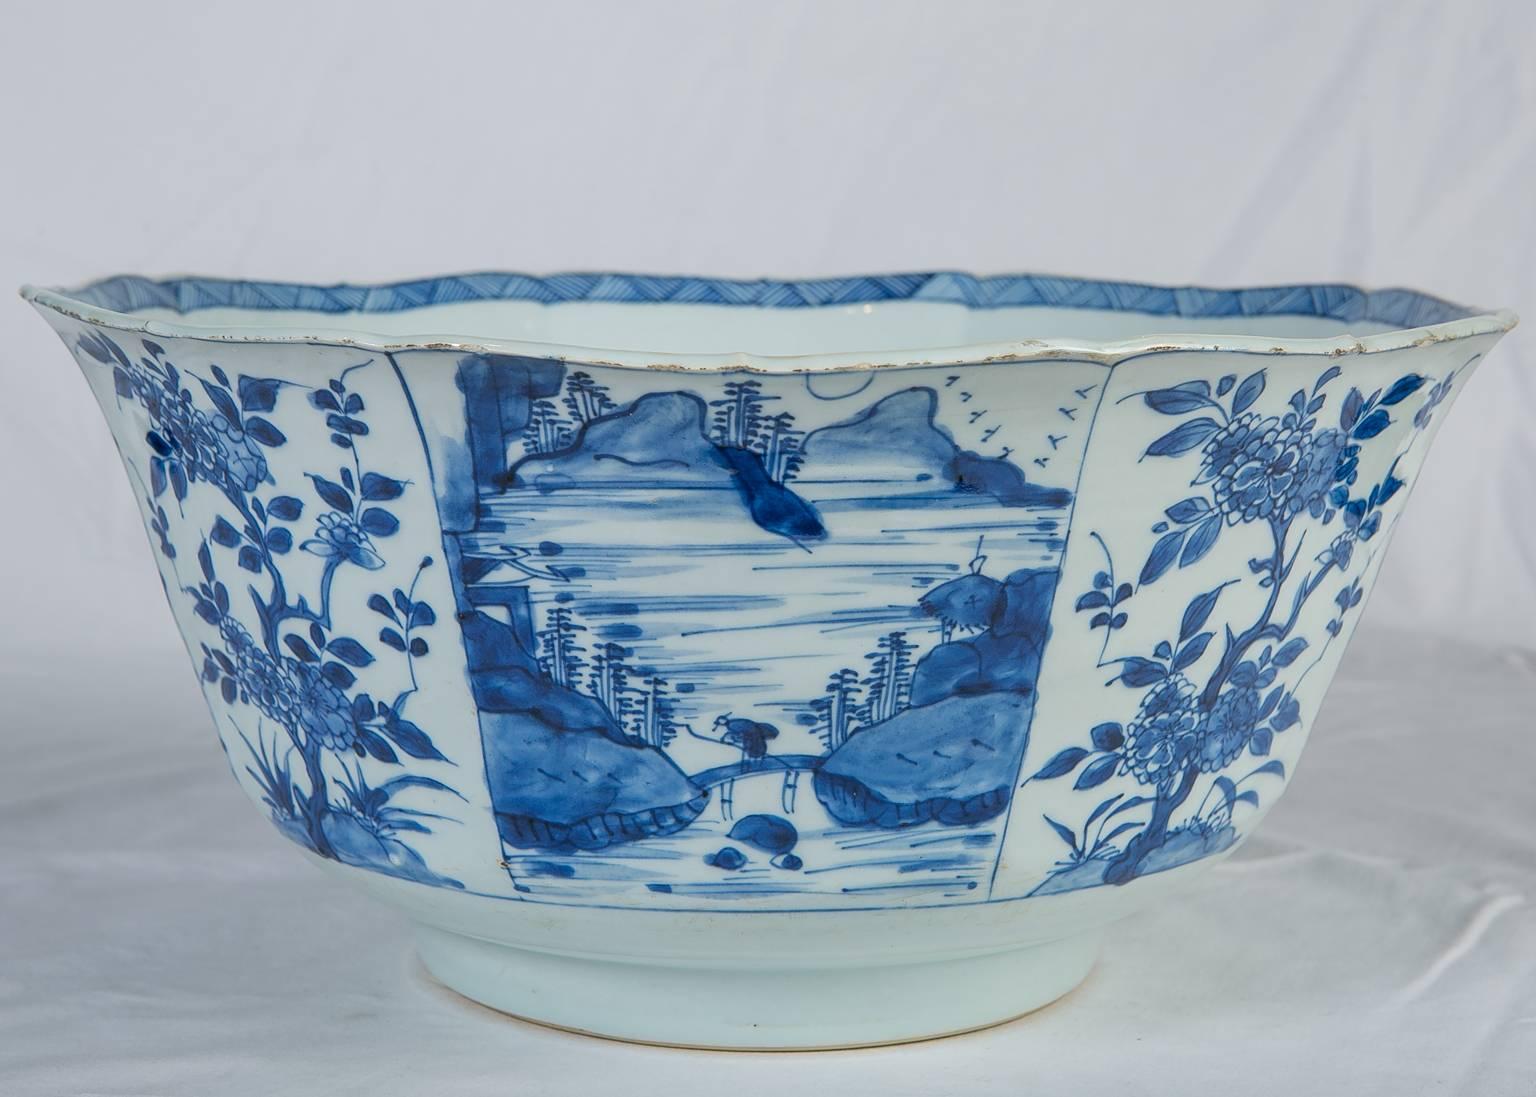 Kangxi Chinese blue and white porcelain punch bowl, circa 1700. Painted in underglaze cobalt blue, the bowl is decorated to the exterior with alternating panels showing flowering fruit trees and scenes of mountains, along the seashore. The bowl has